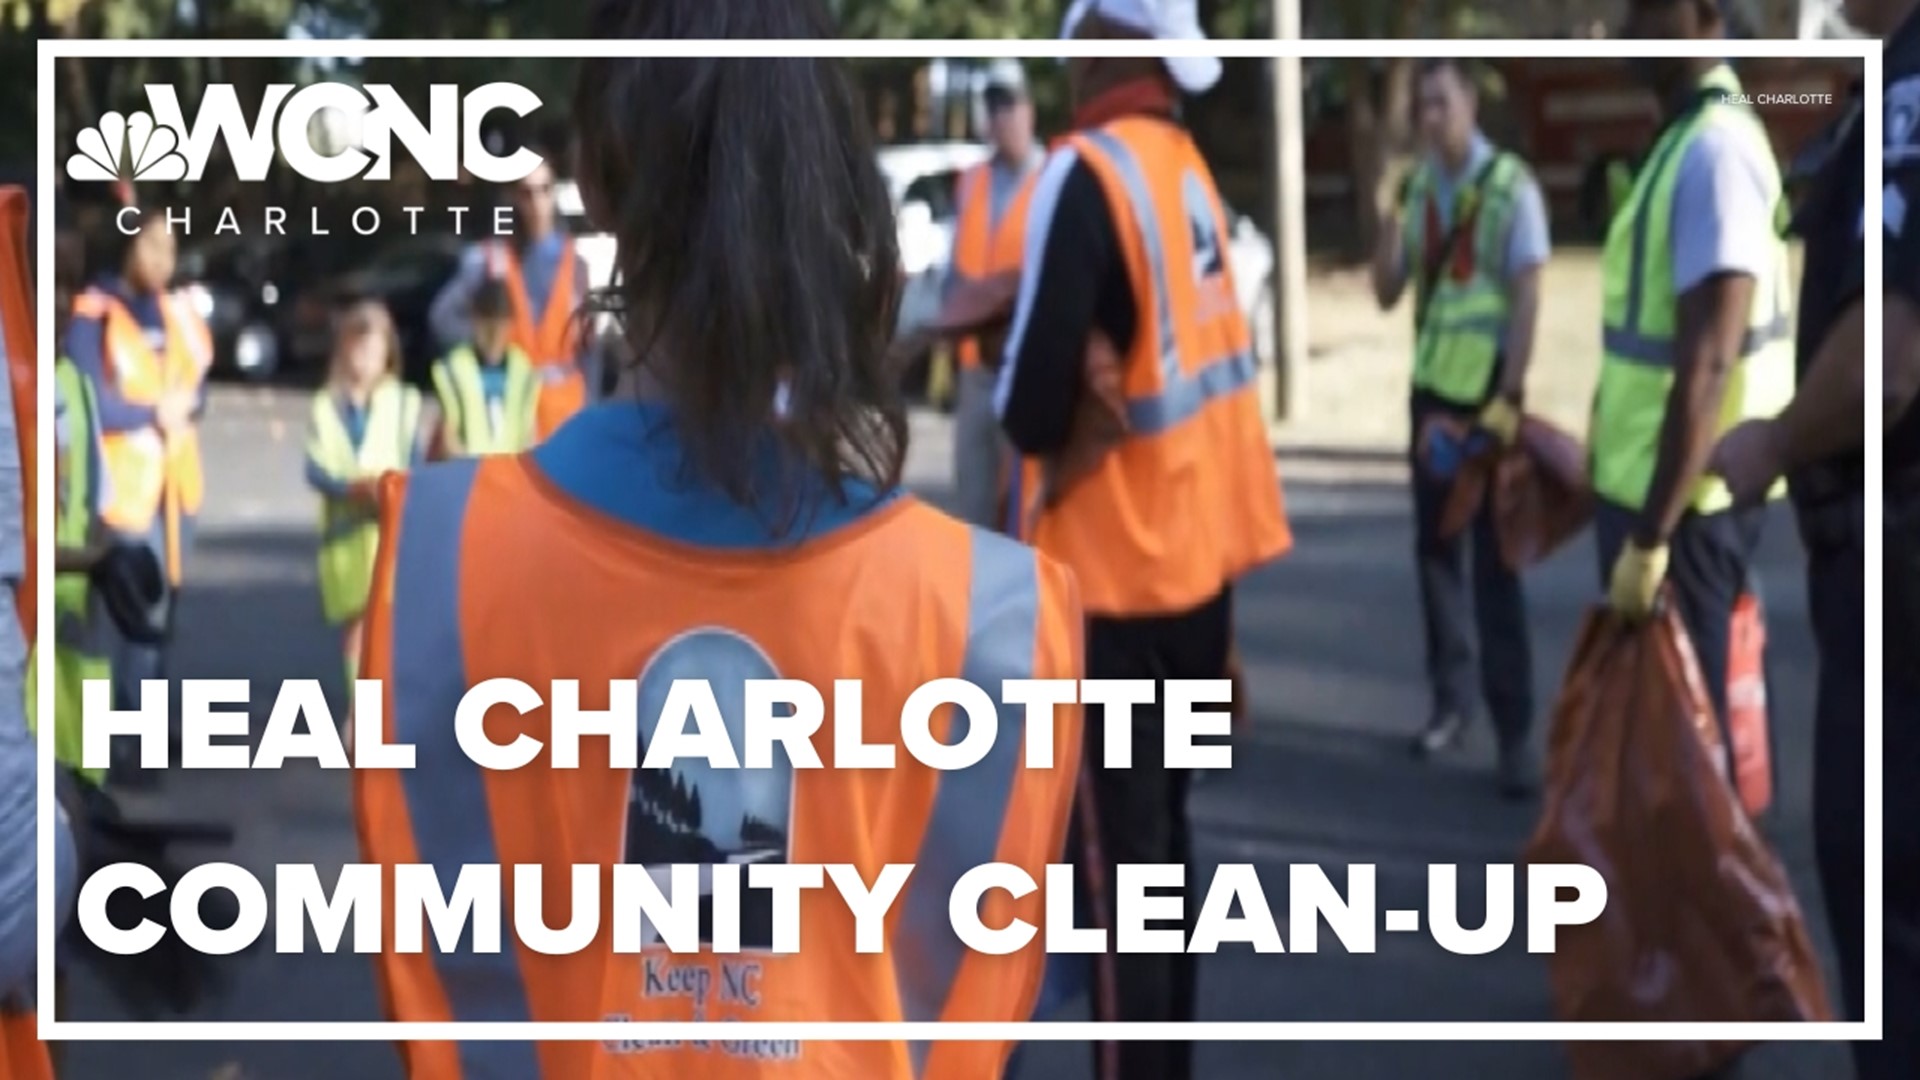 HEAL Charlotte is hosting a community cleanup on Reagan Drive in Charlotte on Saturday.